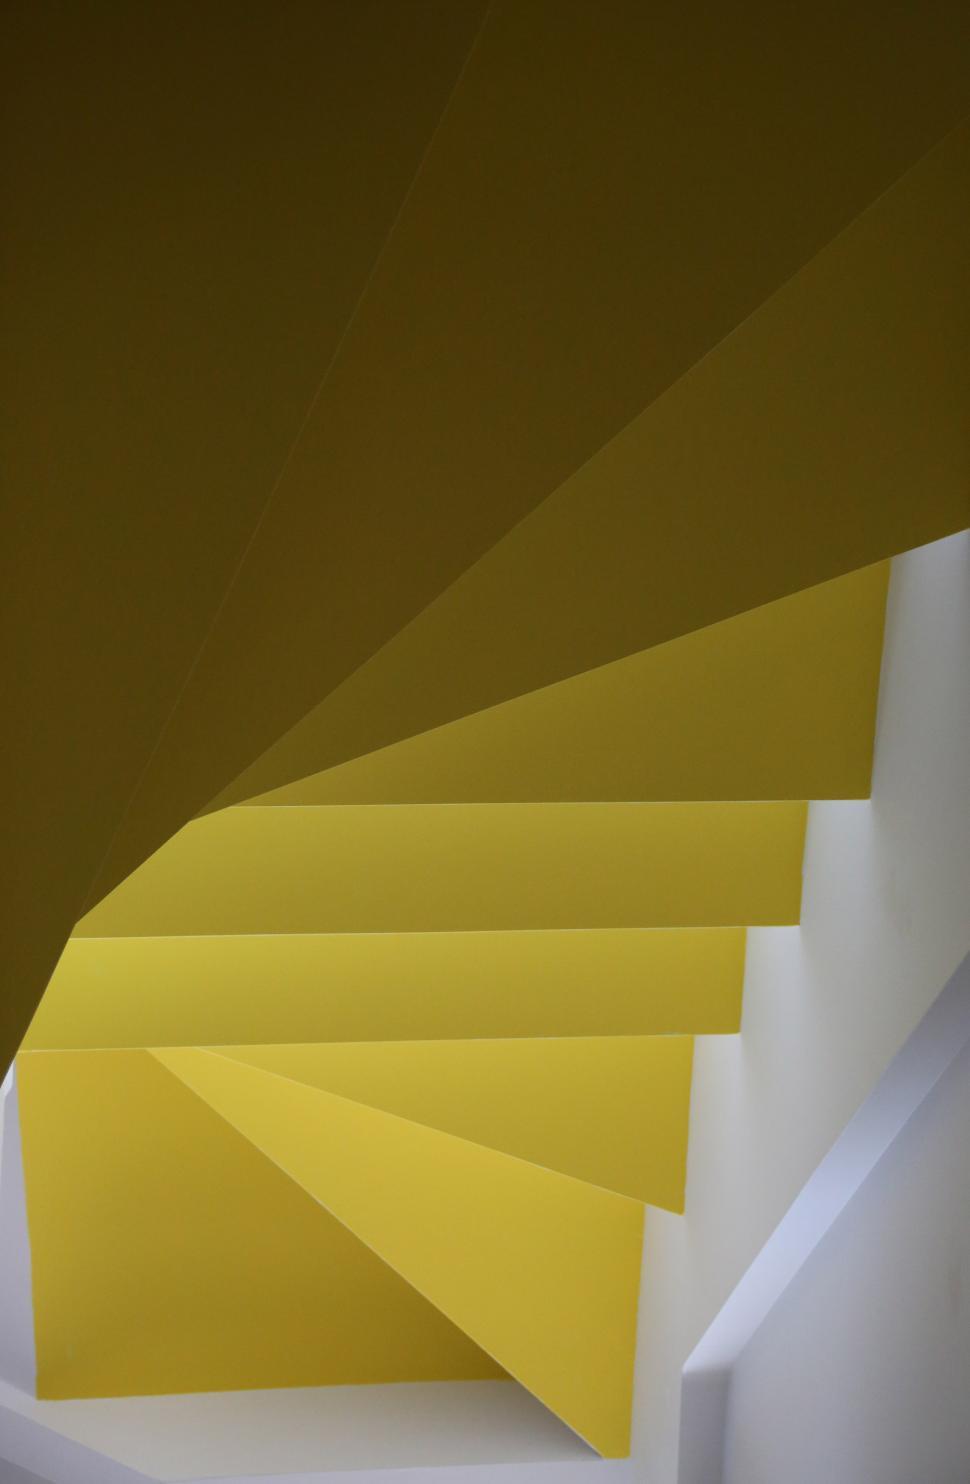 Free Image of Staircase Painting in Yellow and Brown Tones 